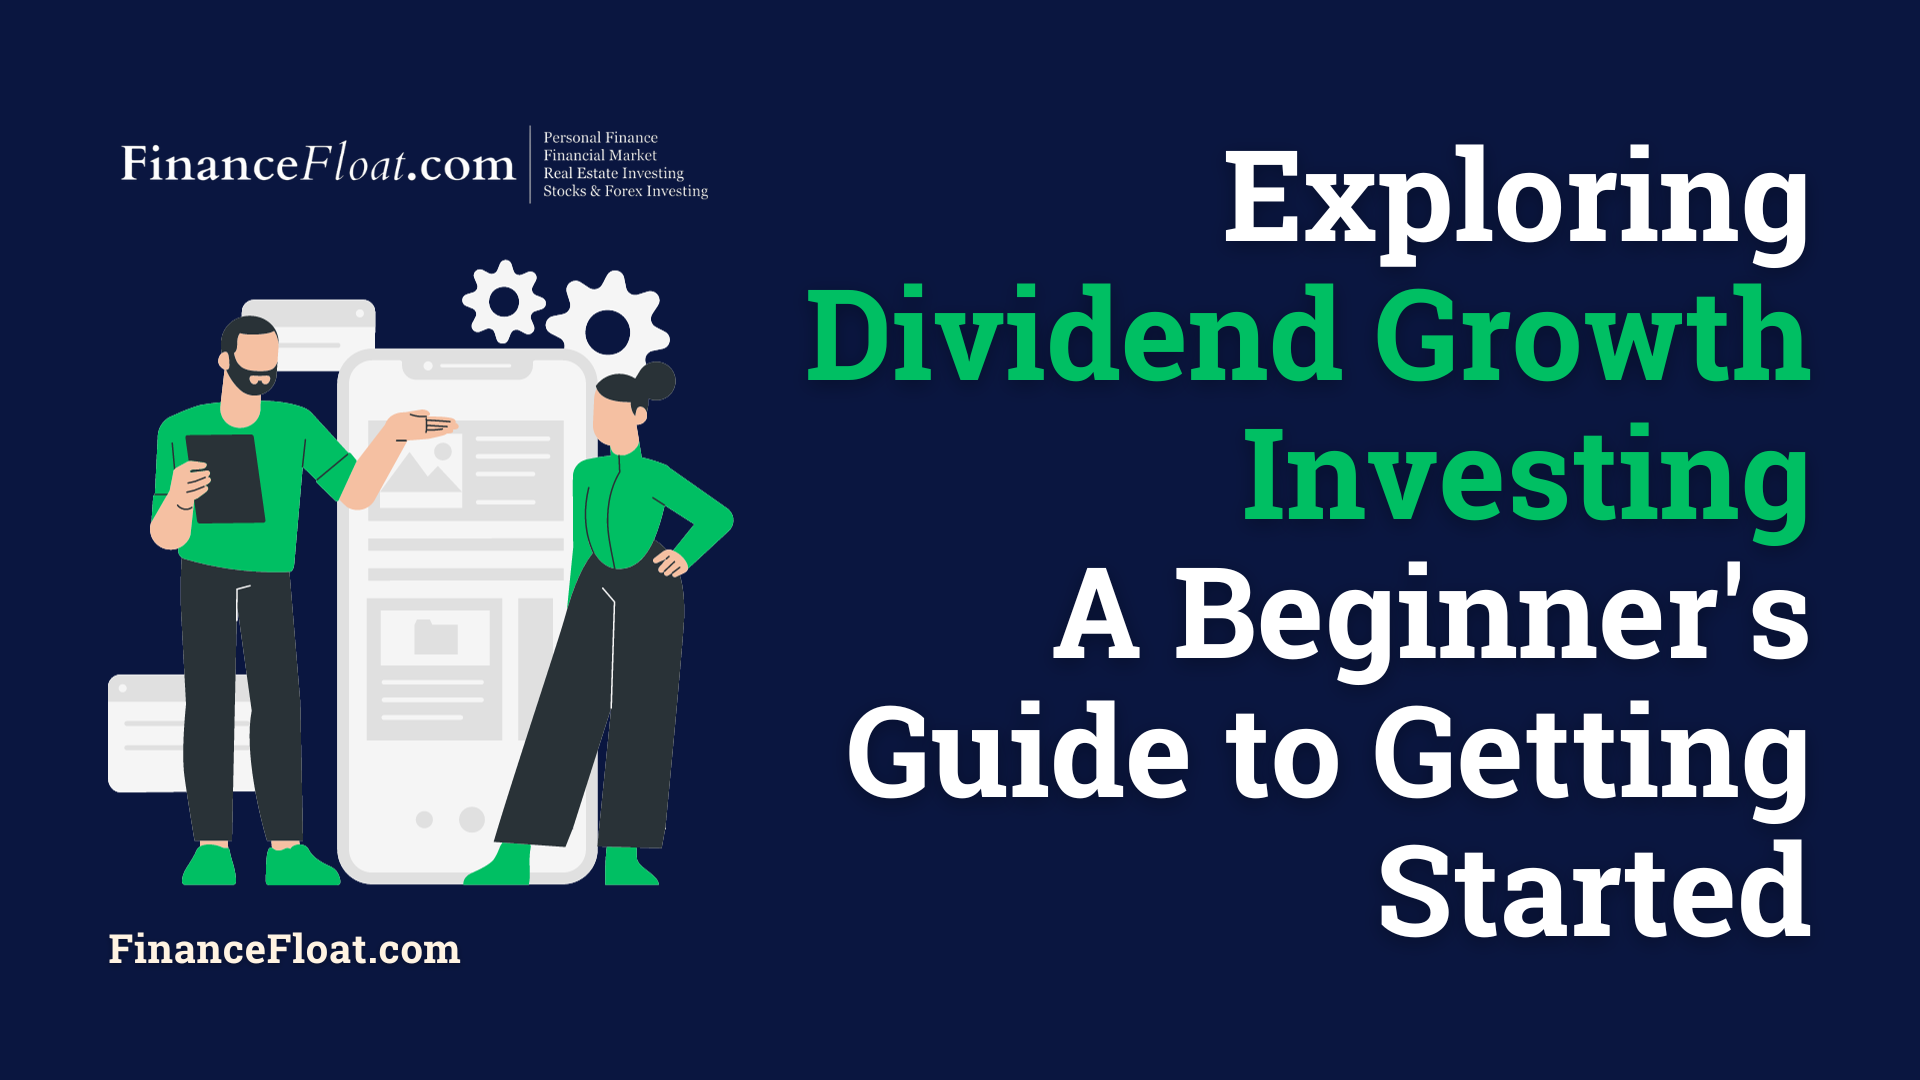 Exploring Dividend Growth Investing A Beginner's Guide to Getting Started